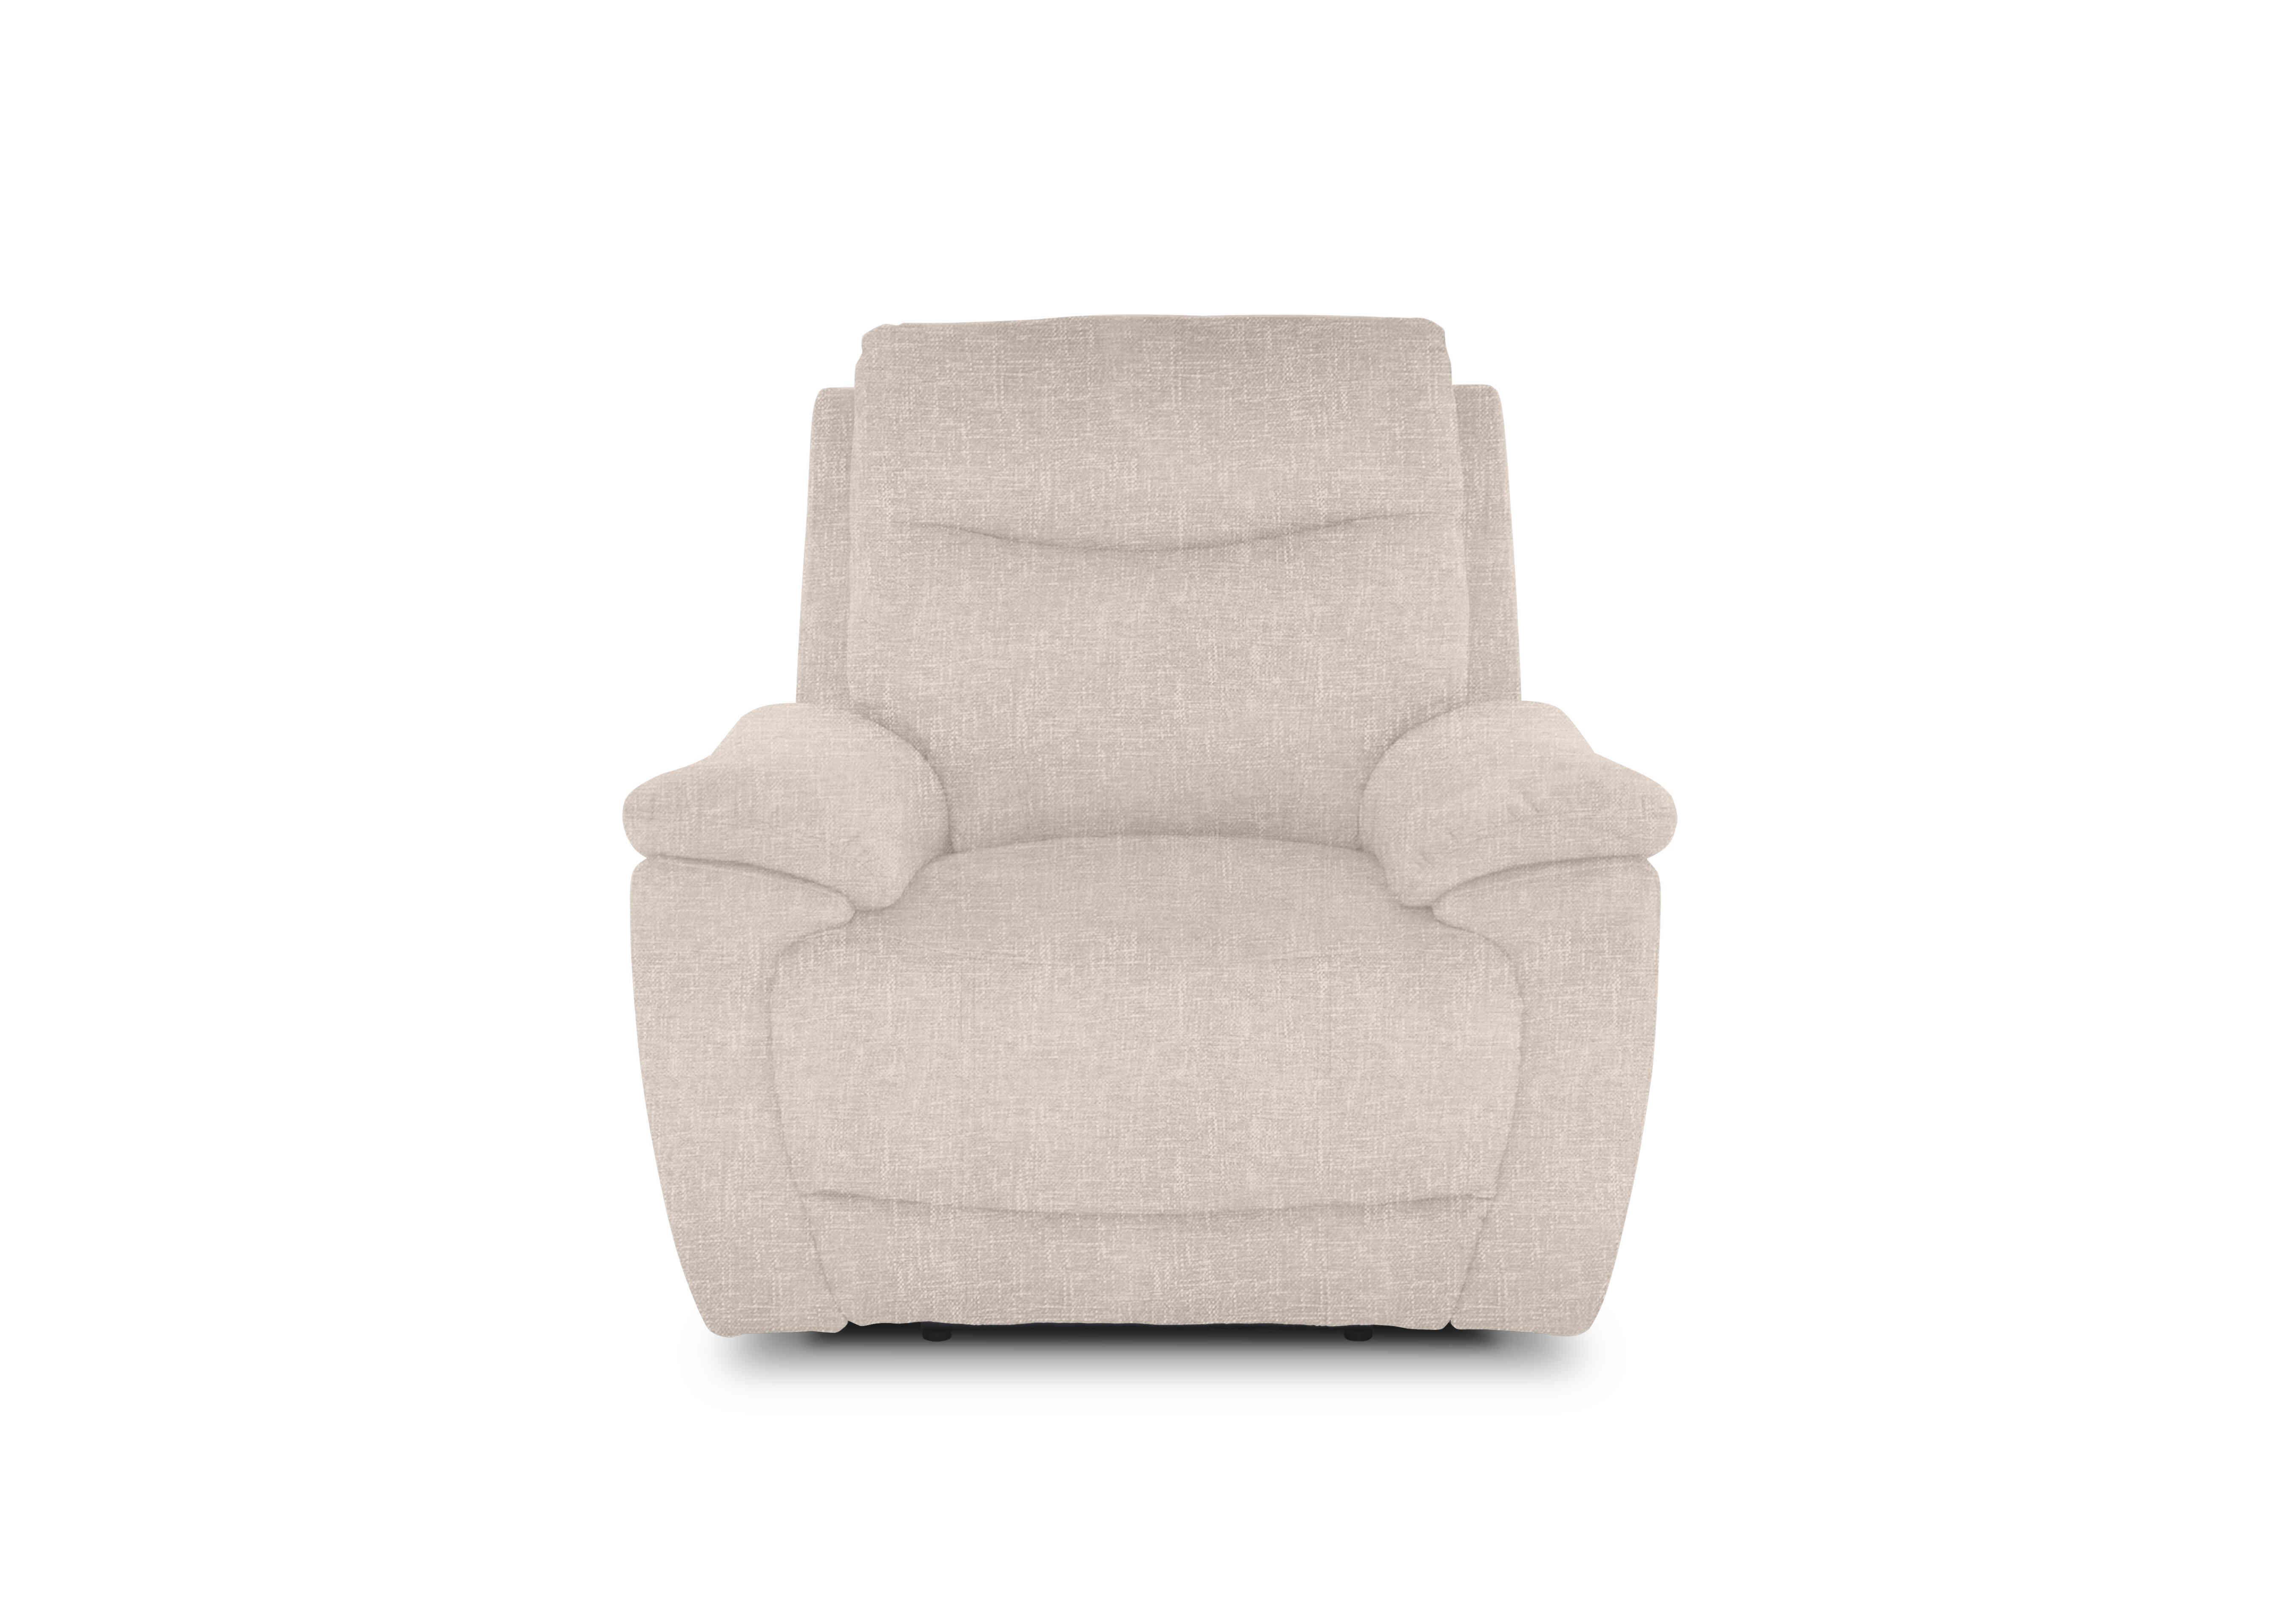 Sloane Fabric Chair in 13445 Anivia Nature on Furniture Village